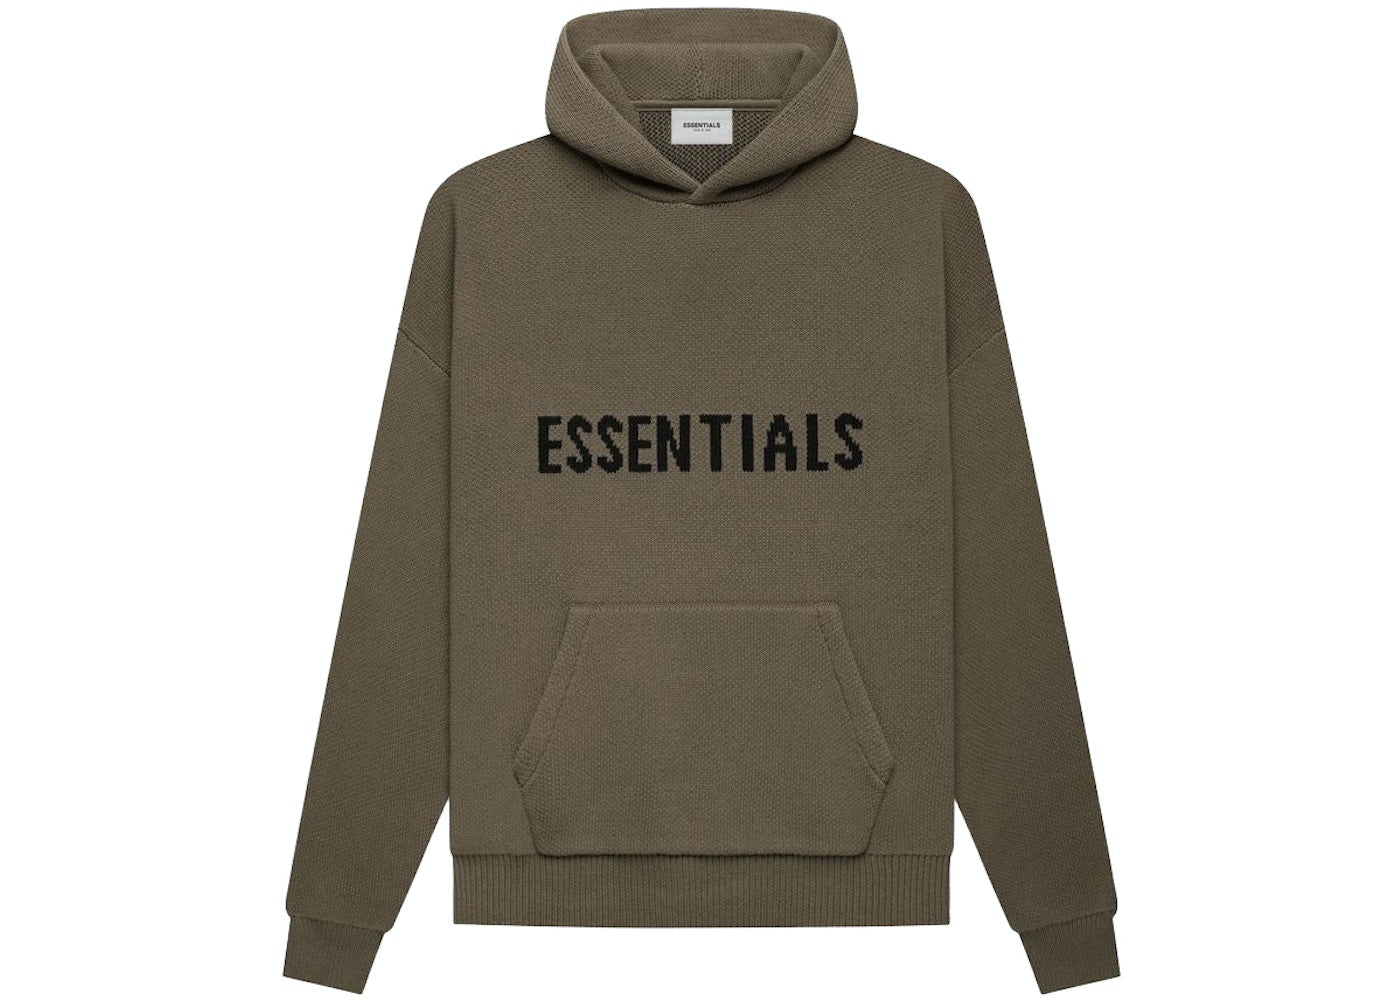 FEAR OF GOD ESSENTIALS KNIT PULLOVER HOODIE HARVEST